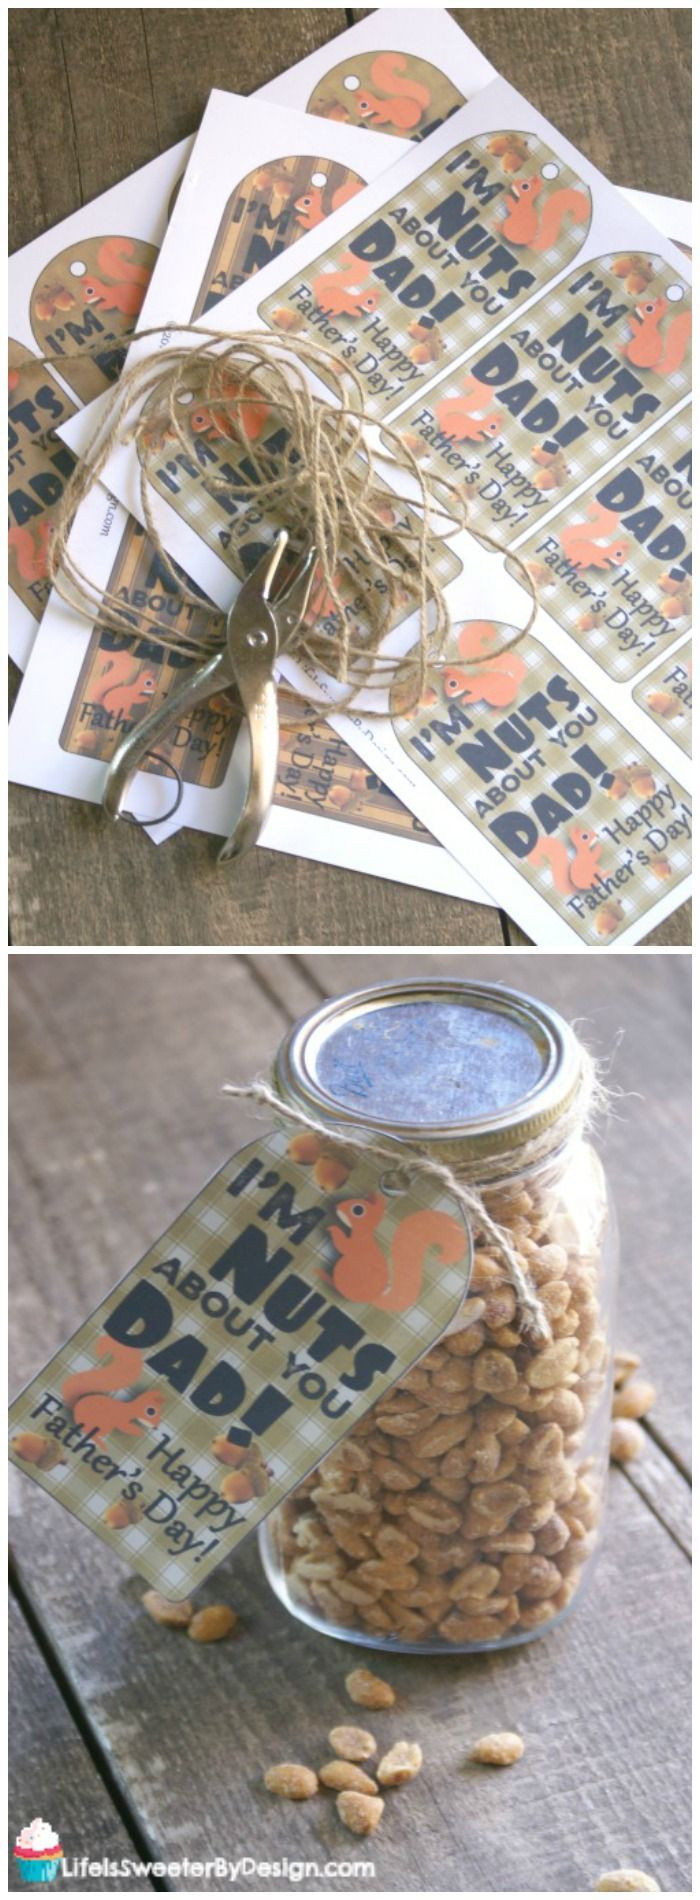 Quick DIY Father'S Day Gifts
 A simple DIY Father s Day t idea that dad s will love